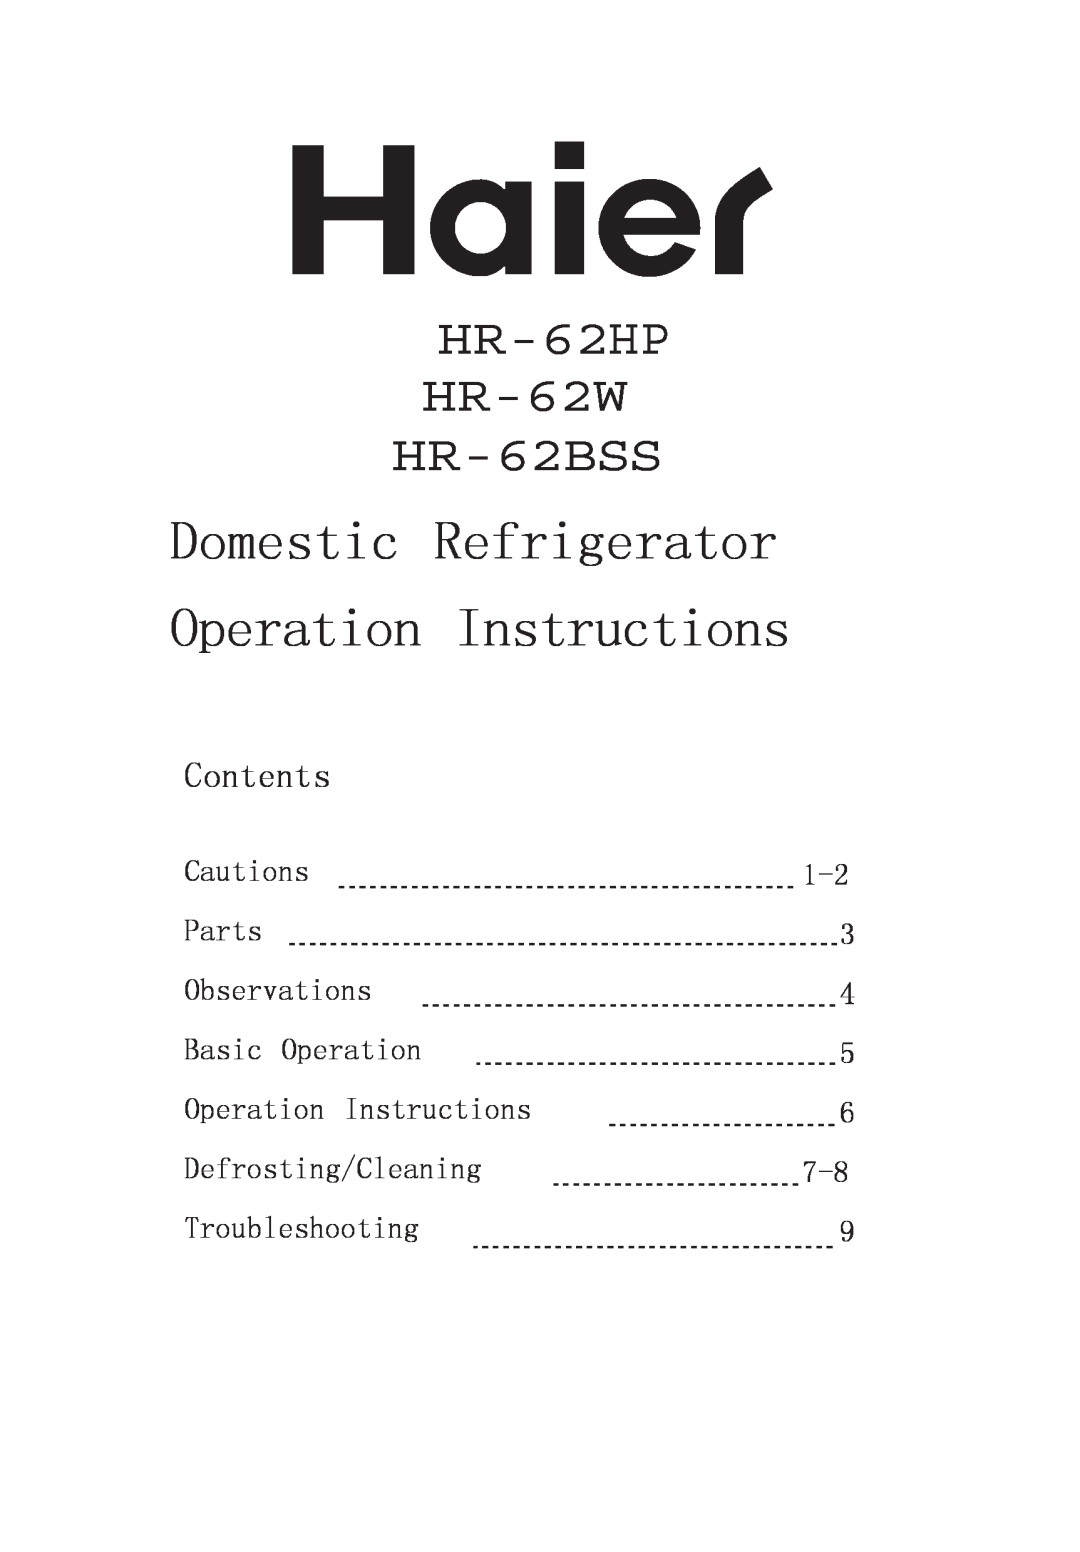 Haier manual HR-62HP HR-62W HR-62BSS, Domestic Refrigerator Operation Instructions, Contents 